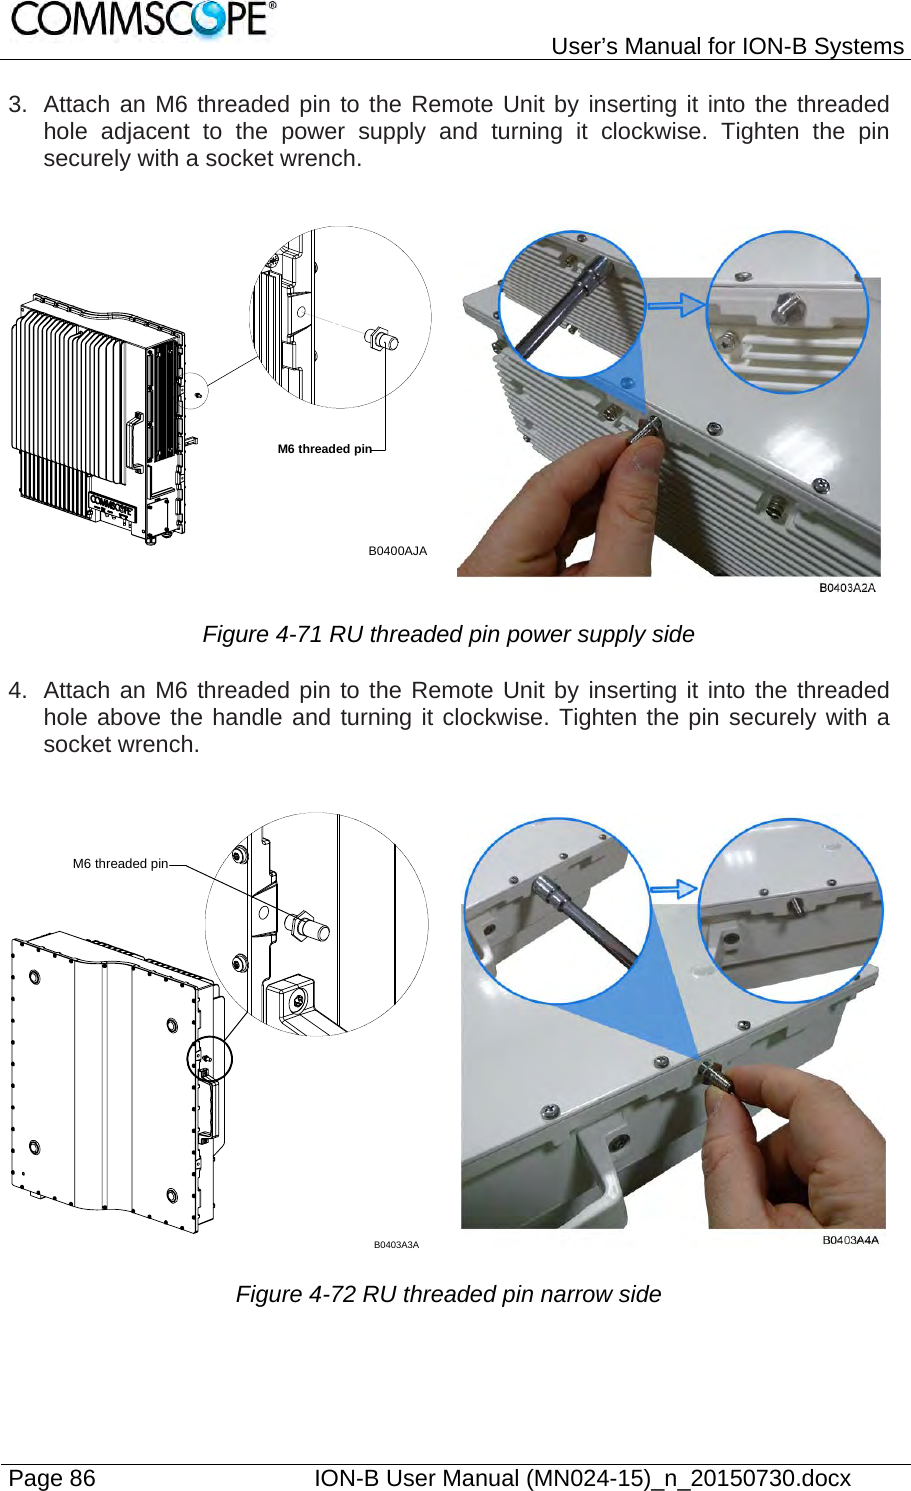   User’s Manual for ION-B Systems Page 86    ION-B User Manual (MN024-15)_n_20150730.docx  3.  Attach an M6 threaded pin to the Remote Unit by inserting it into the threaded hole adjacent to the power supply and turning it clockwise. Tighten the pin securely with a socket wrench. Figure 4-71 RU threaded pin power supply side 4.  Attach an M6 threaded pin to the Remote Unit by inserting it into the threaded hole above the handle and turning it clockwise. Tighten the pin securely with a socket wrench.  Figure 4-72 RU threaded pin narrow side M6 threaded pinB0400AJAM6 threaded pinB0403A3A